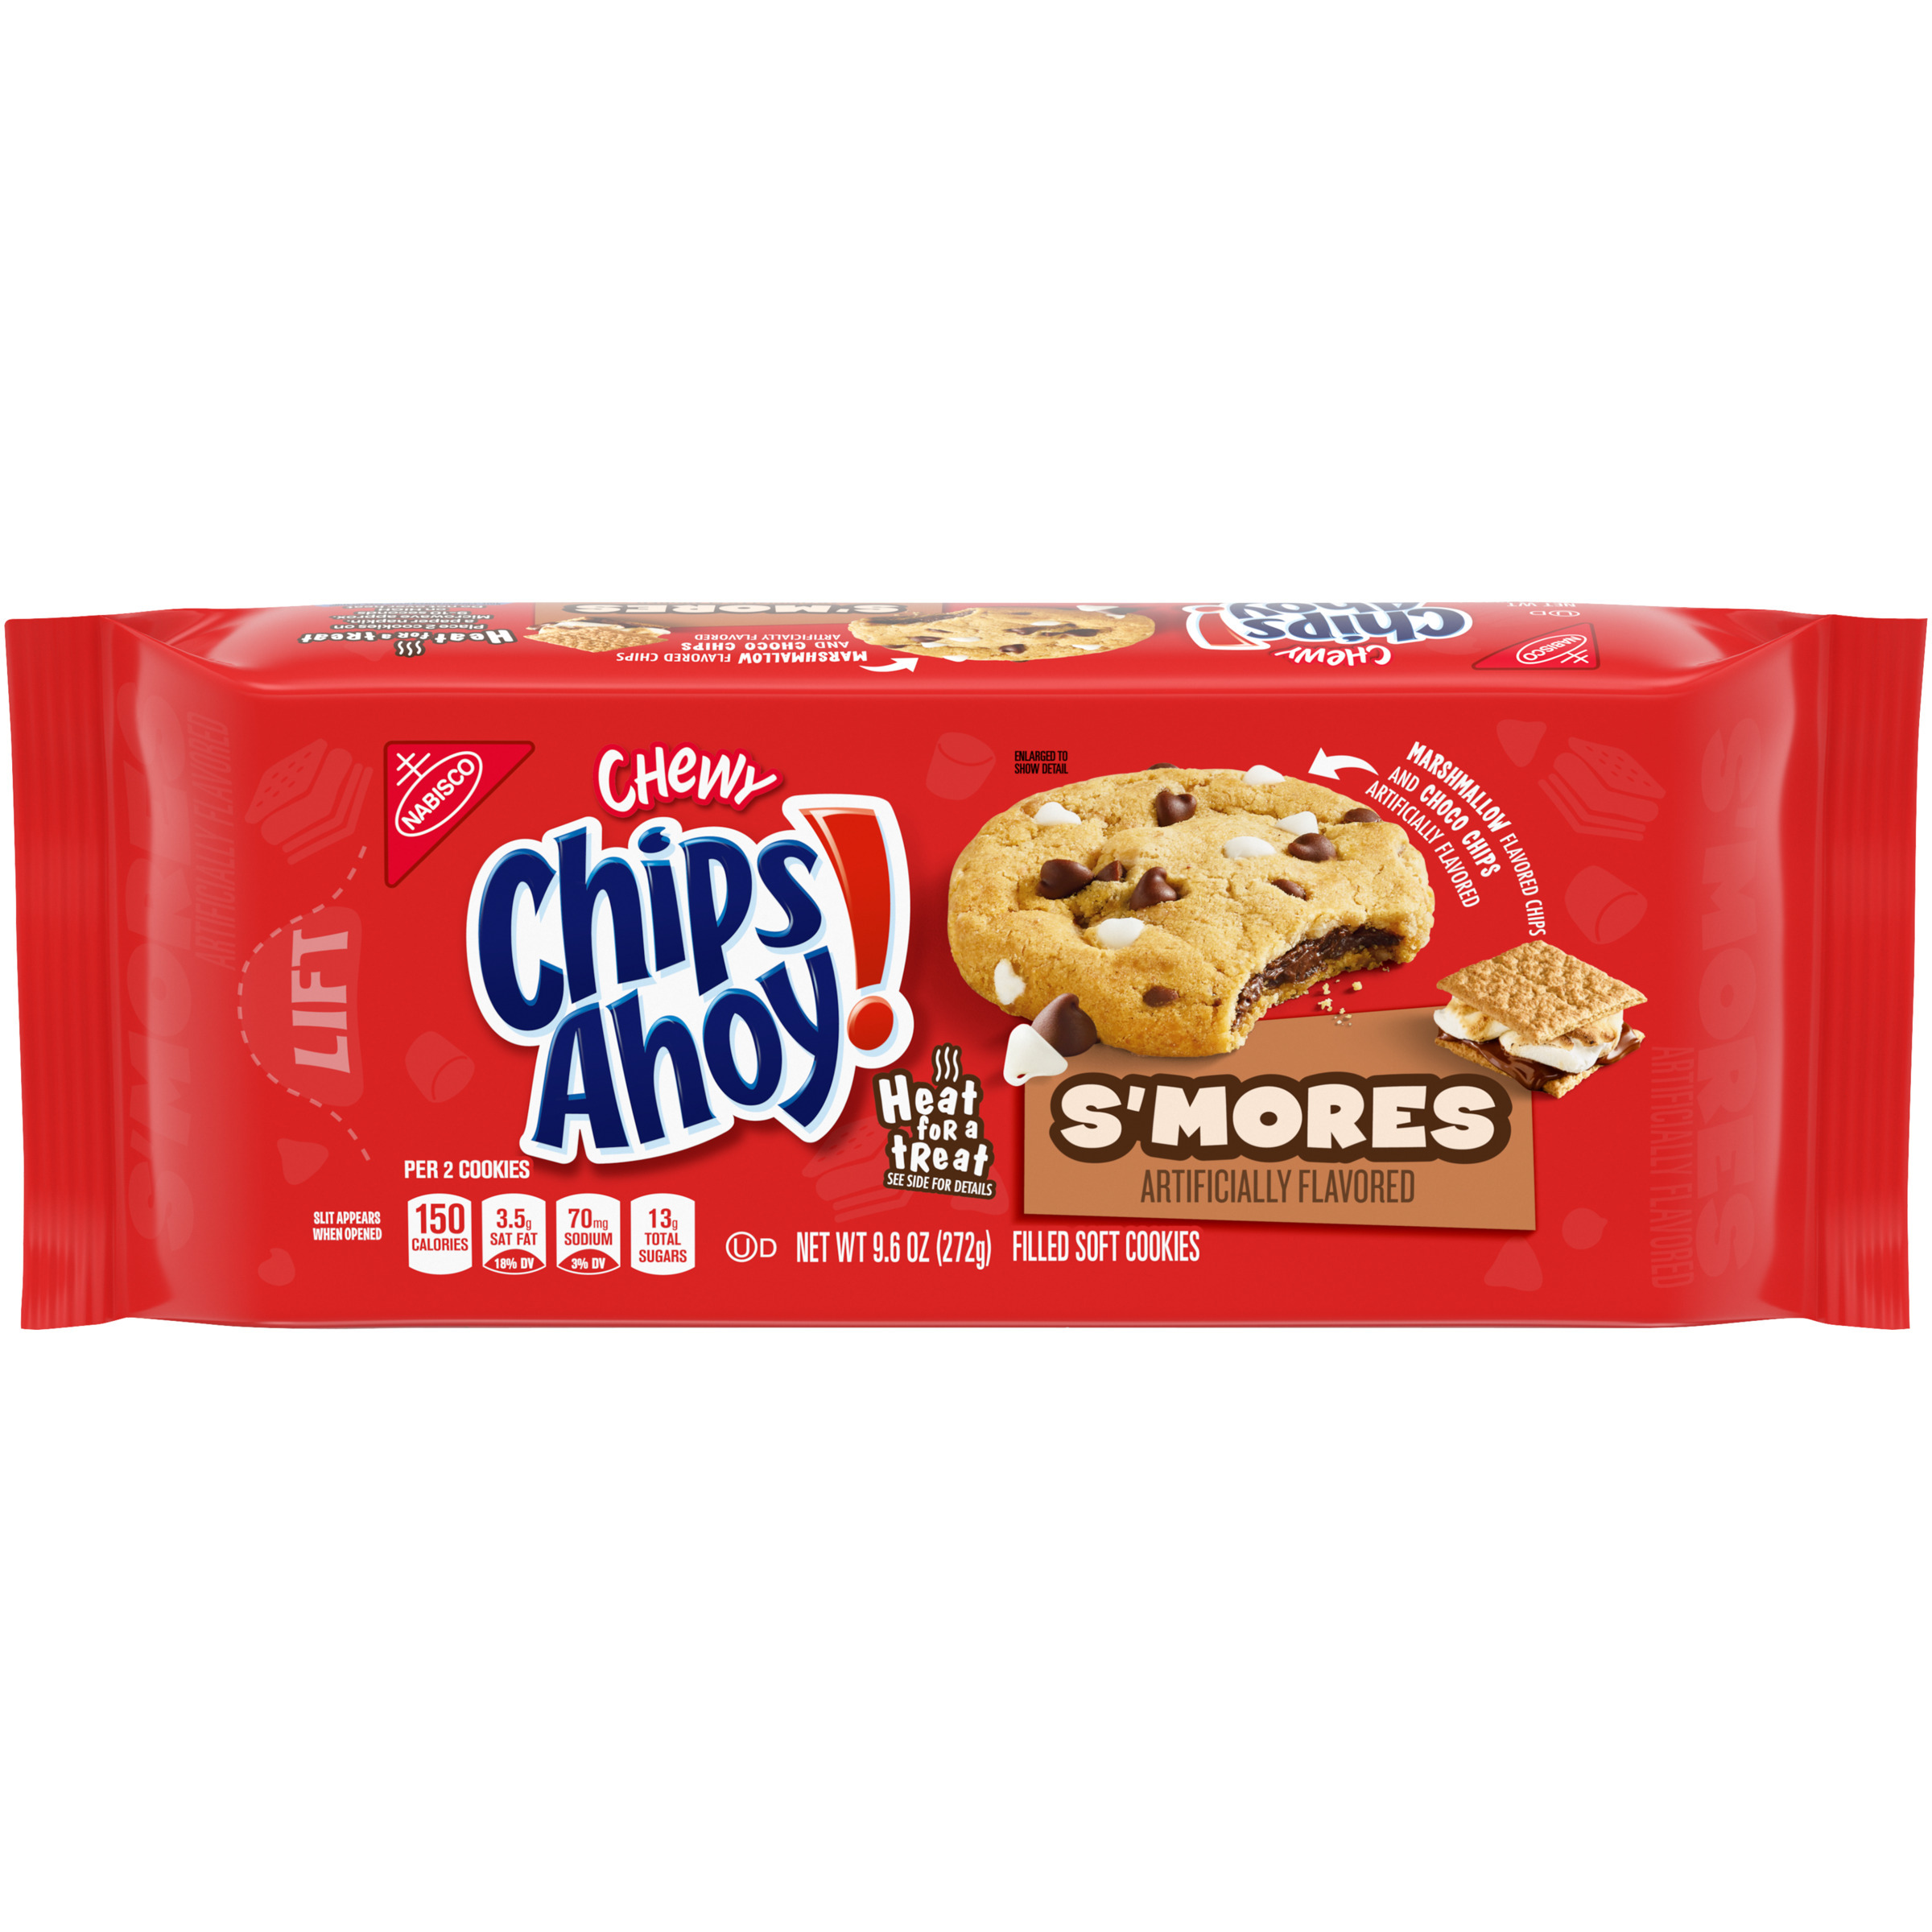 CHIPS AHOY! Chewy S’mores Chocolate Filled Chocolate Chip Cookies, 9.6 oz